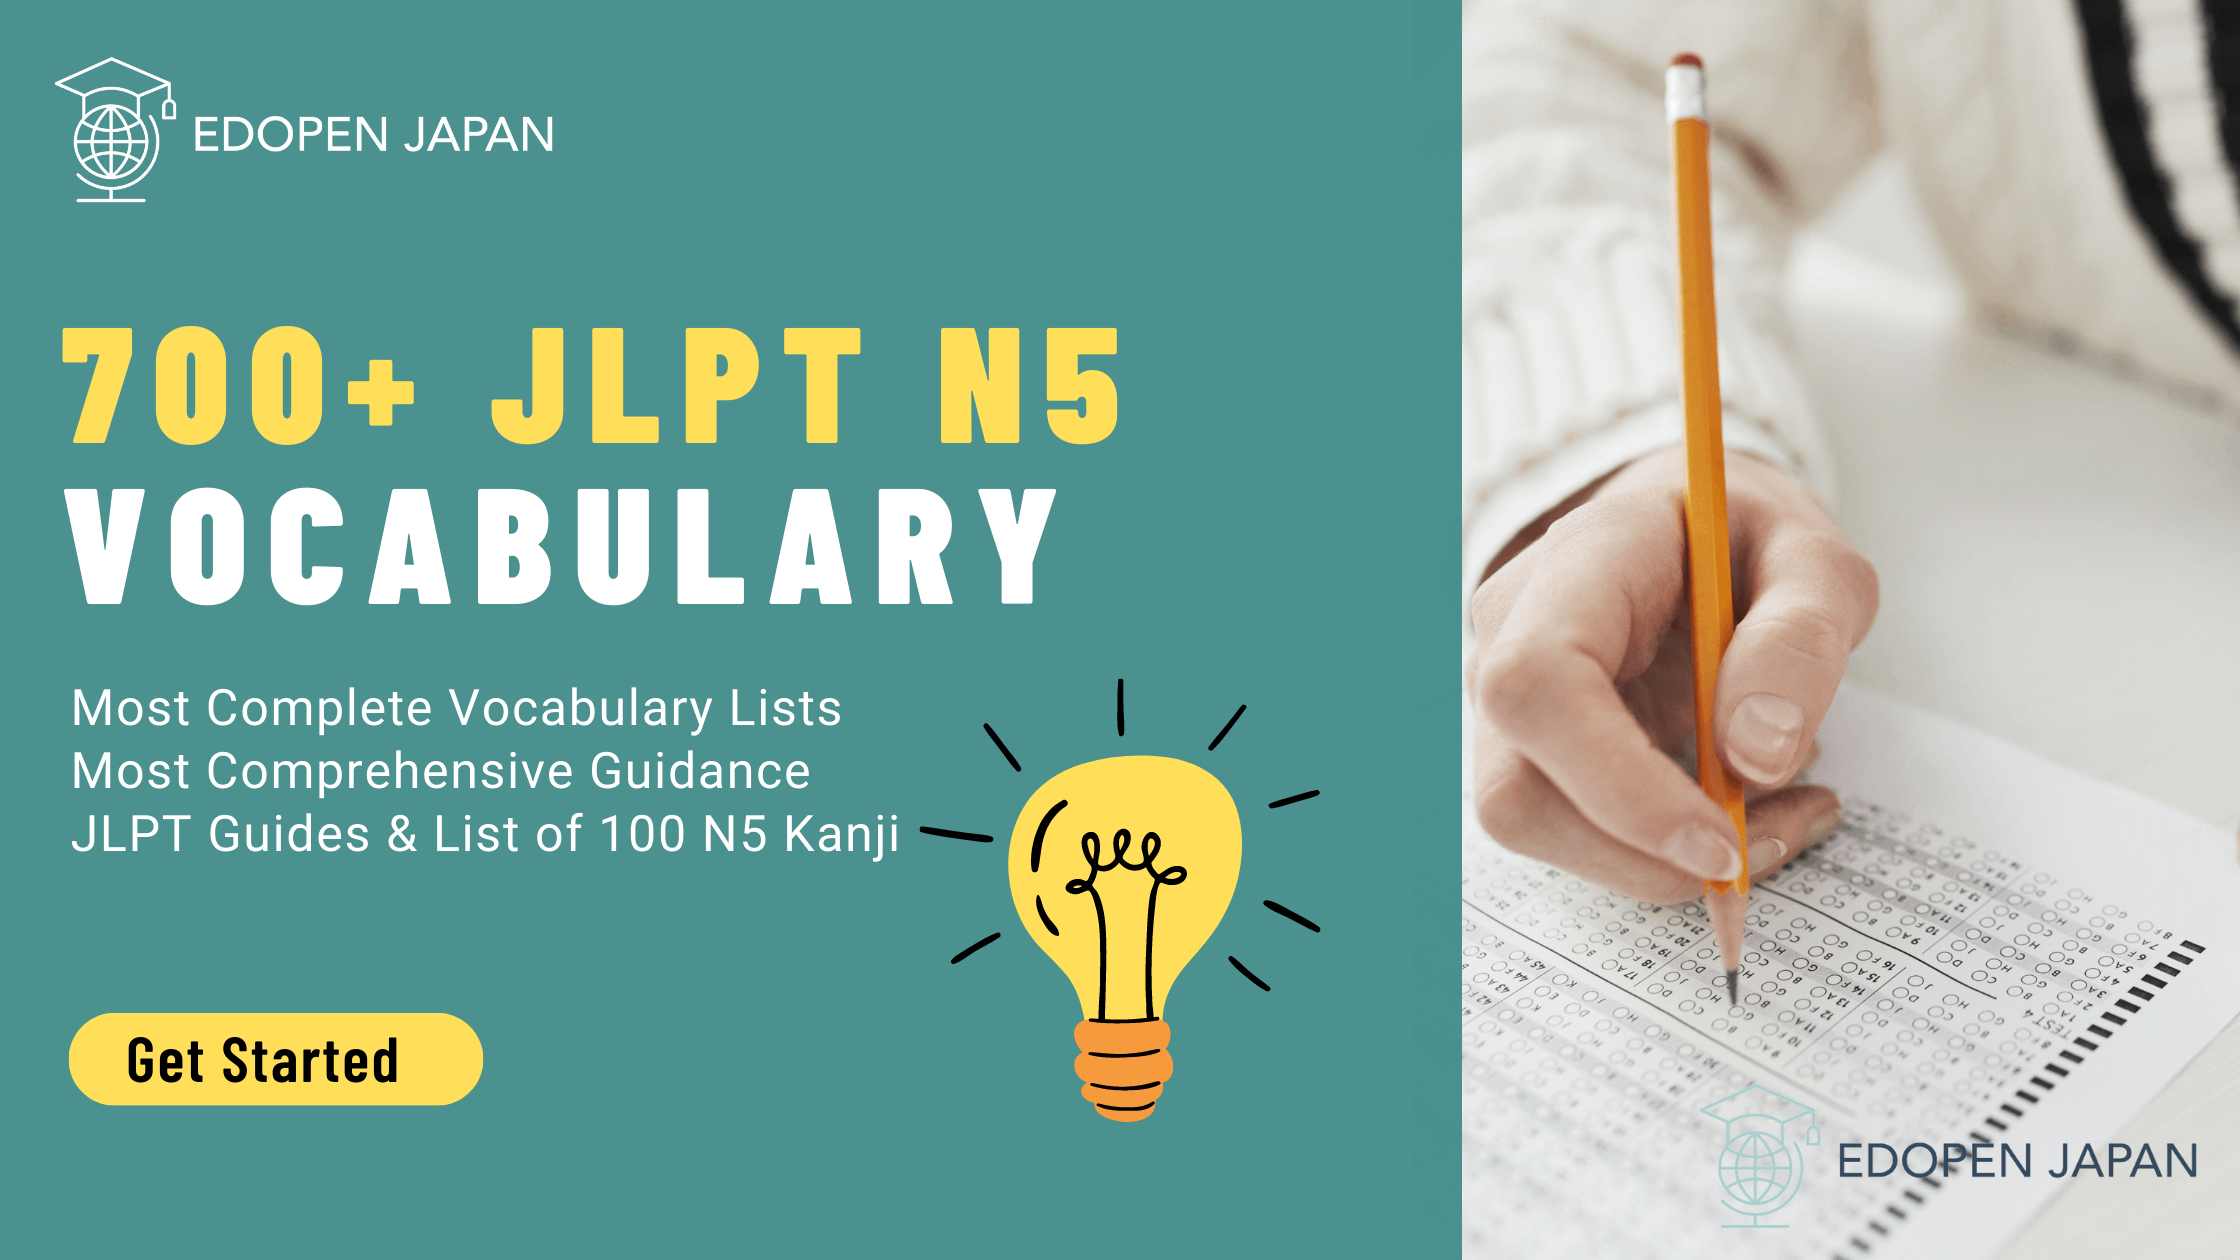 700+ JLPT N5 Vocabulary | The Most Complete Lists You Need to Know | EDOPEN